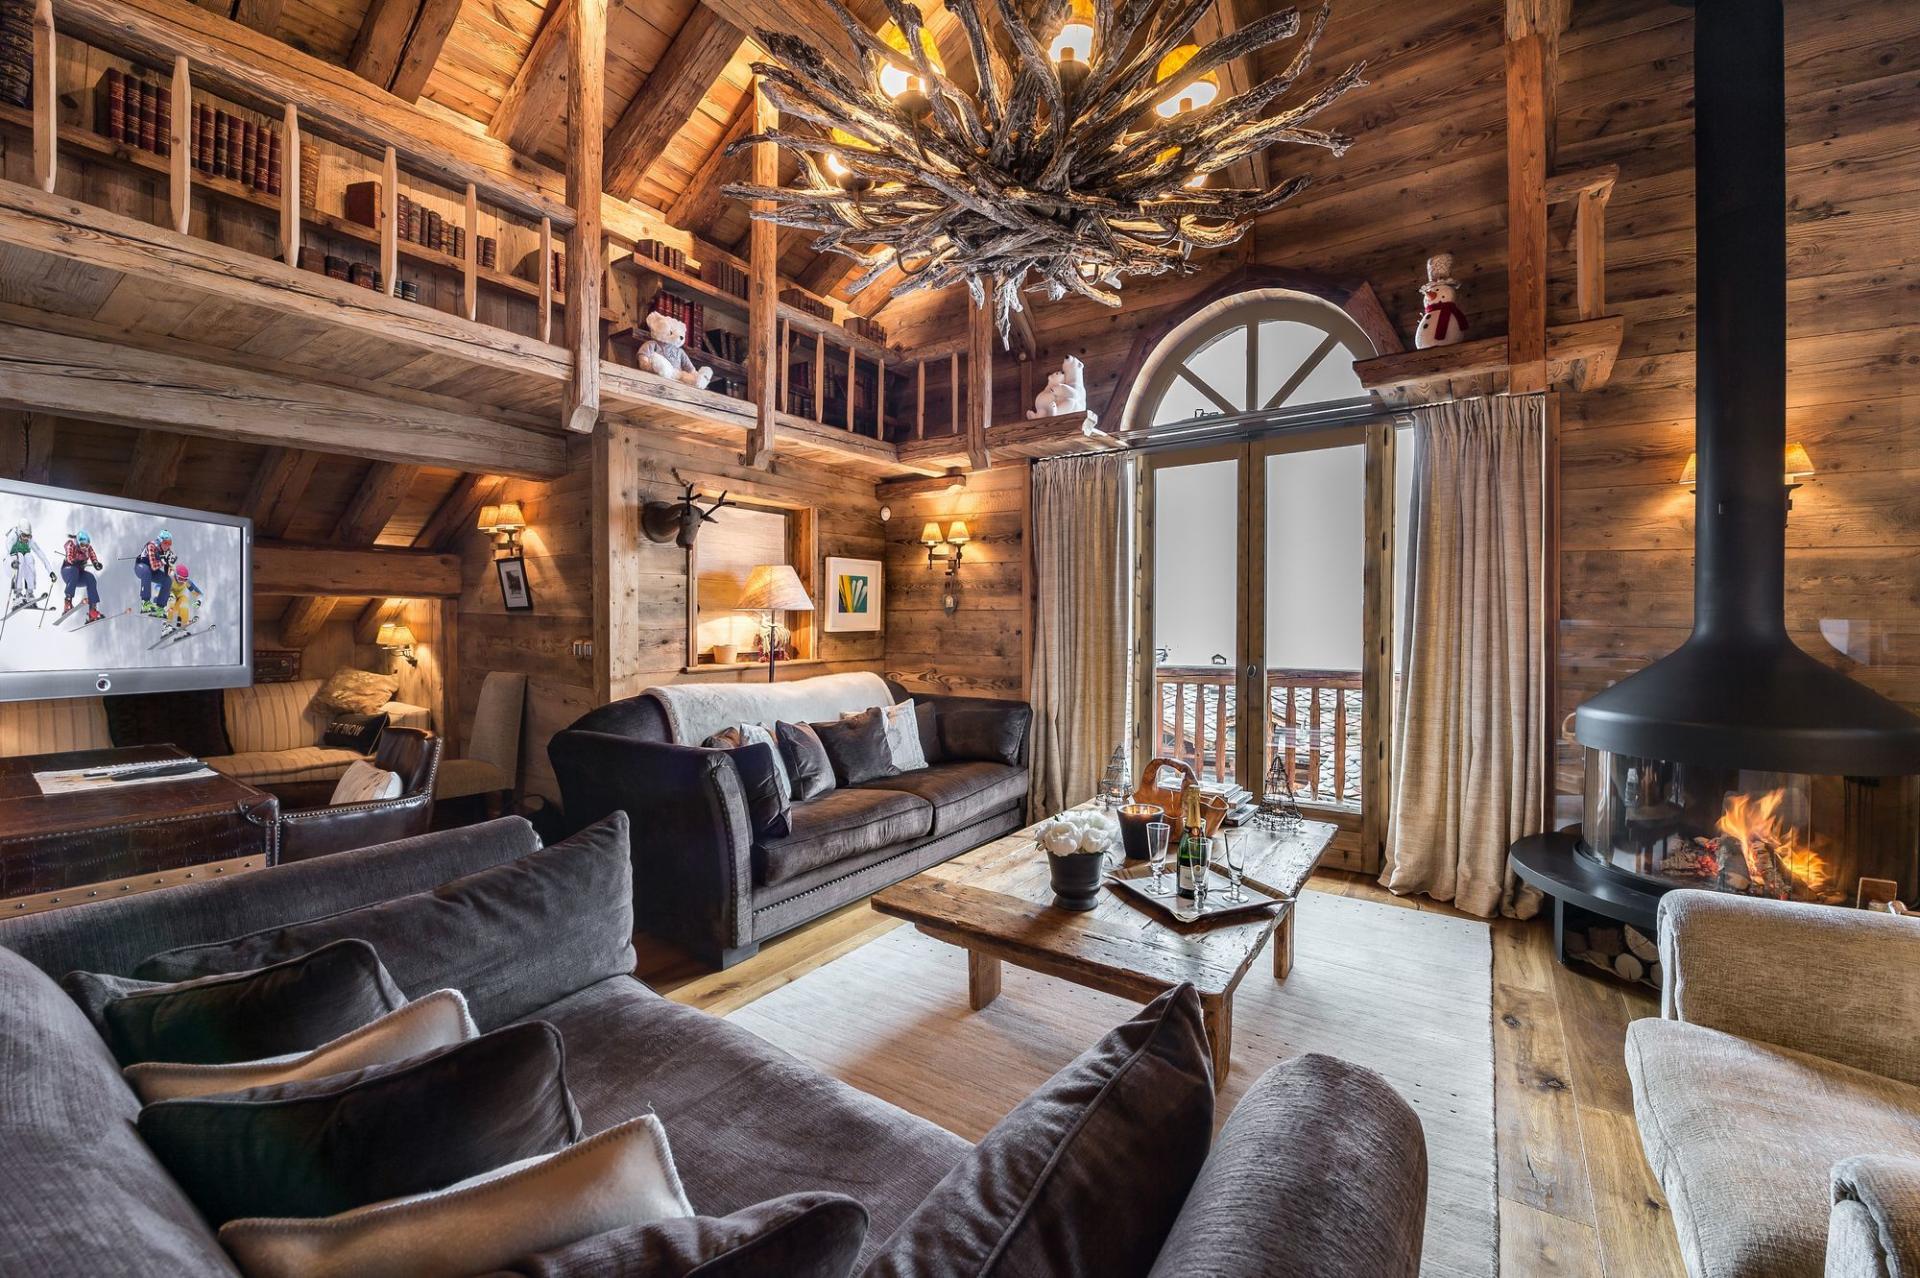 CHALET BELLECOTE, A LUXURY CHALET RENTAL IN COURCHEVEL FOR OUR SKI HOLIDAY